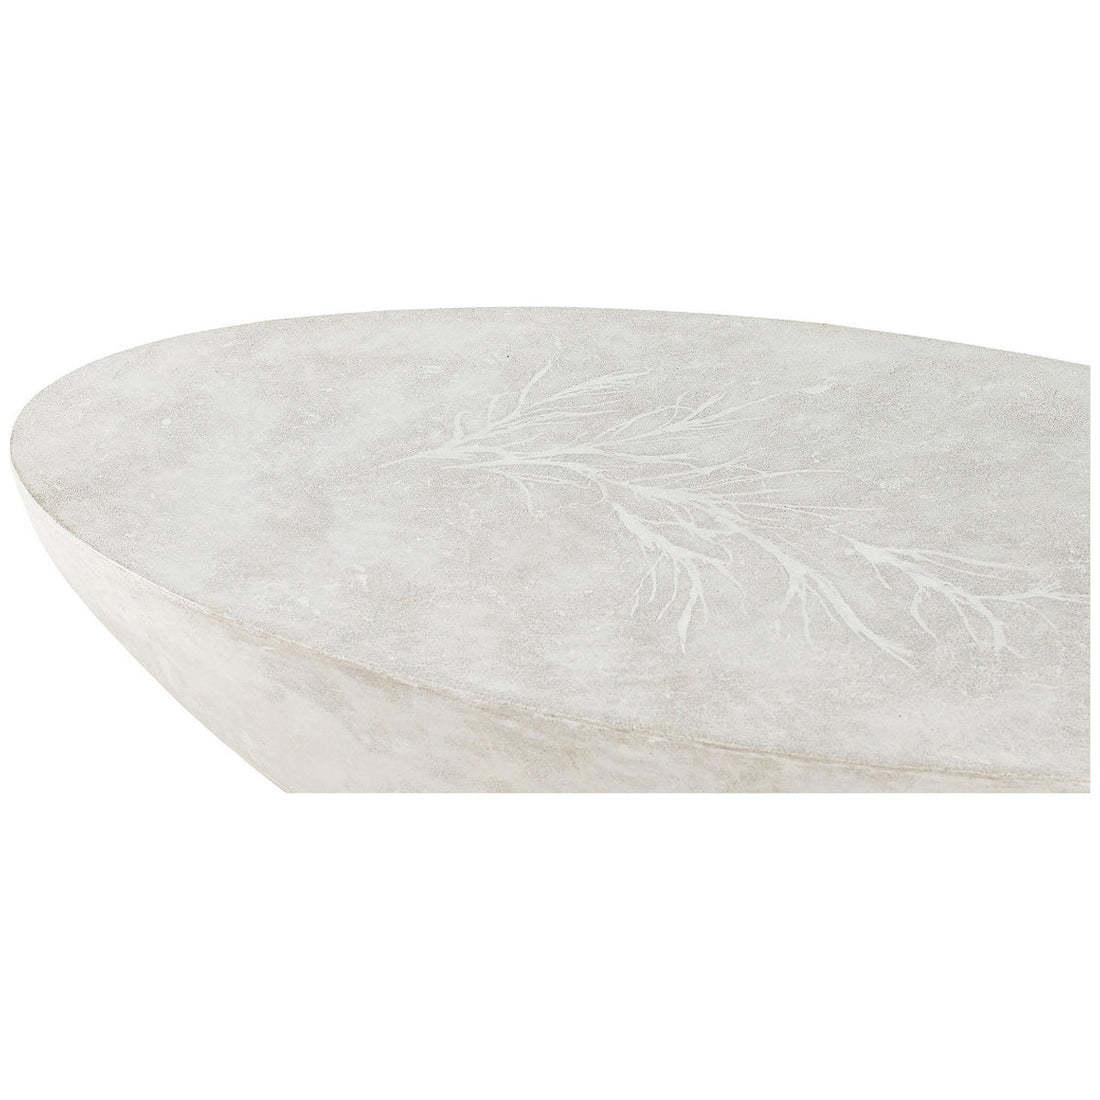 Cast Custom Lightweight Oval Concrete Oasis Coffee or Cocktail Table For Sale